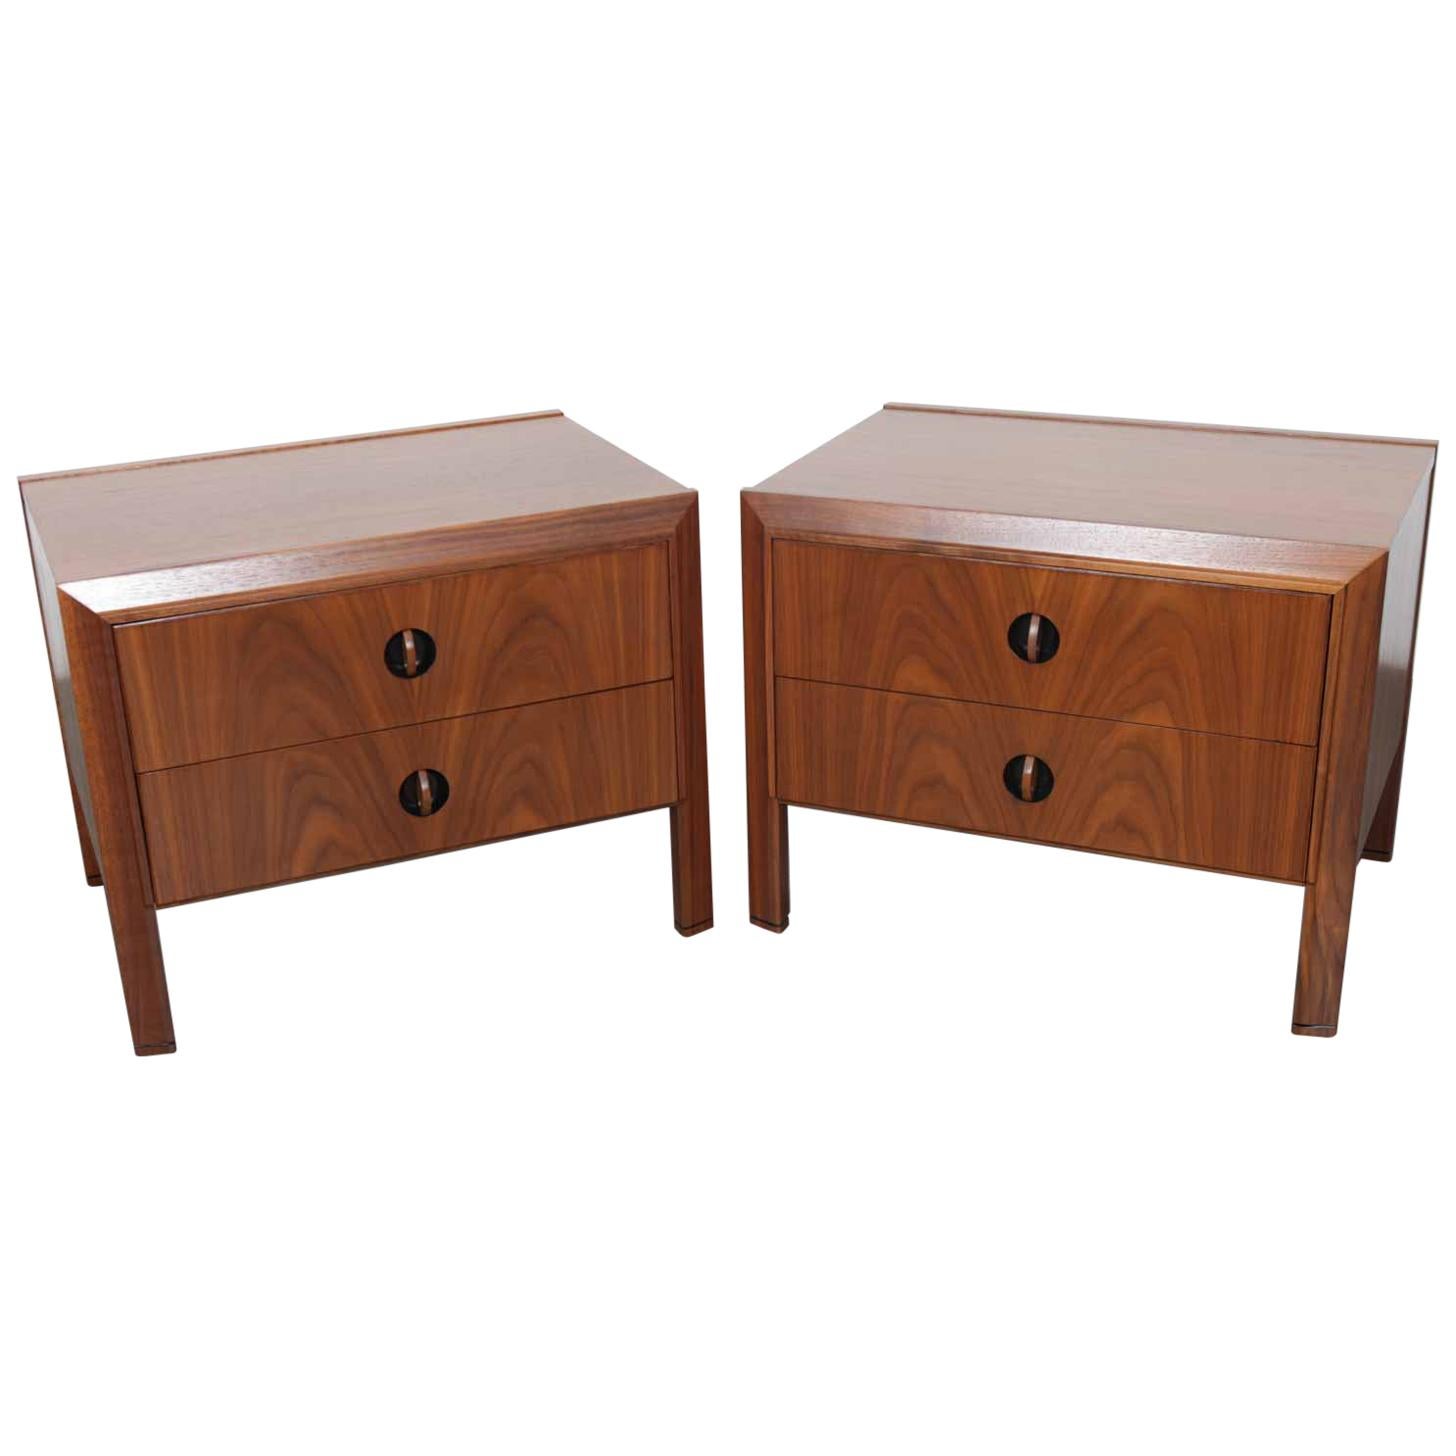 Pair of Walnut End Tables by Milo Baughman for Glenn of California